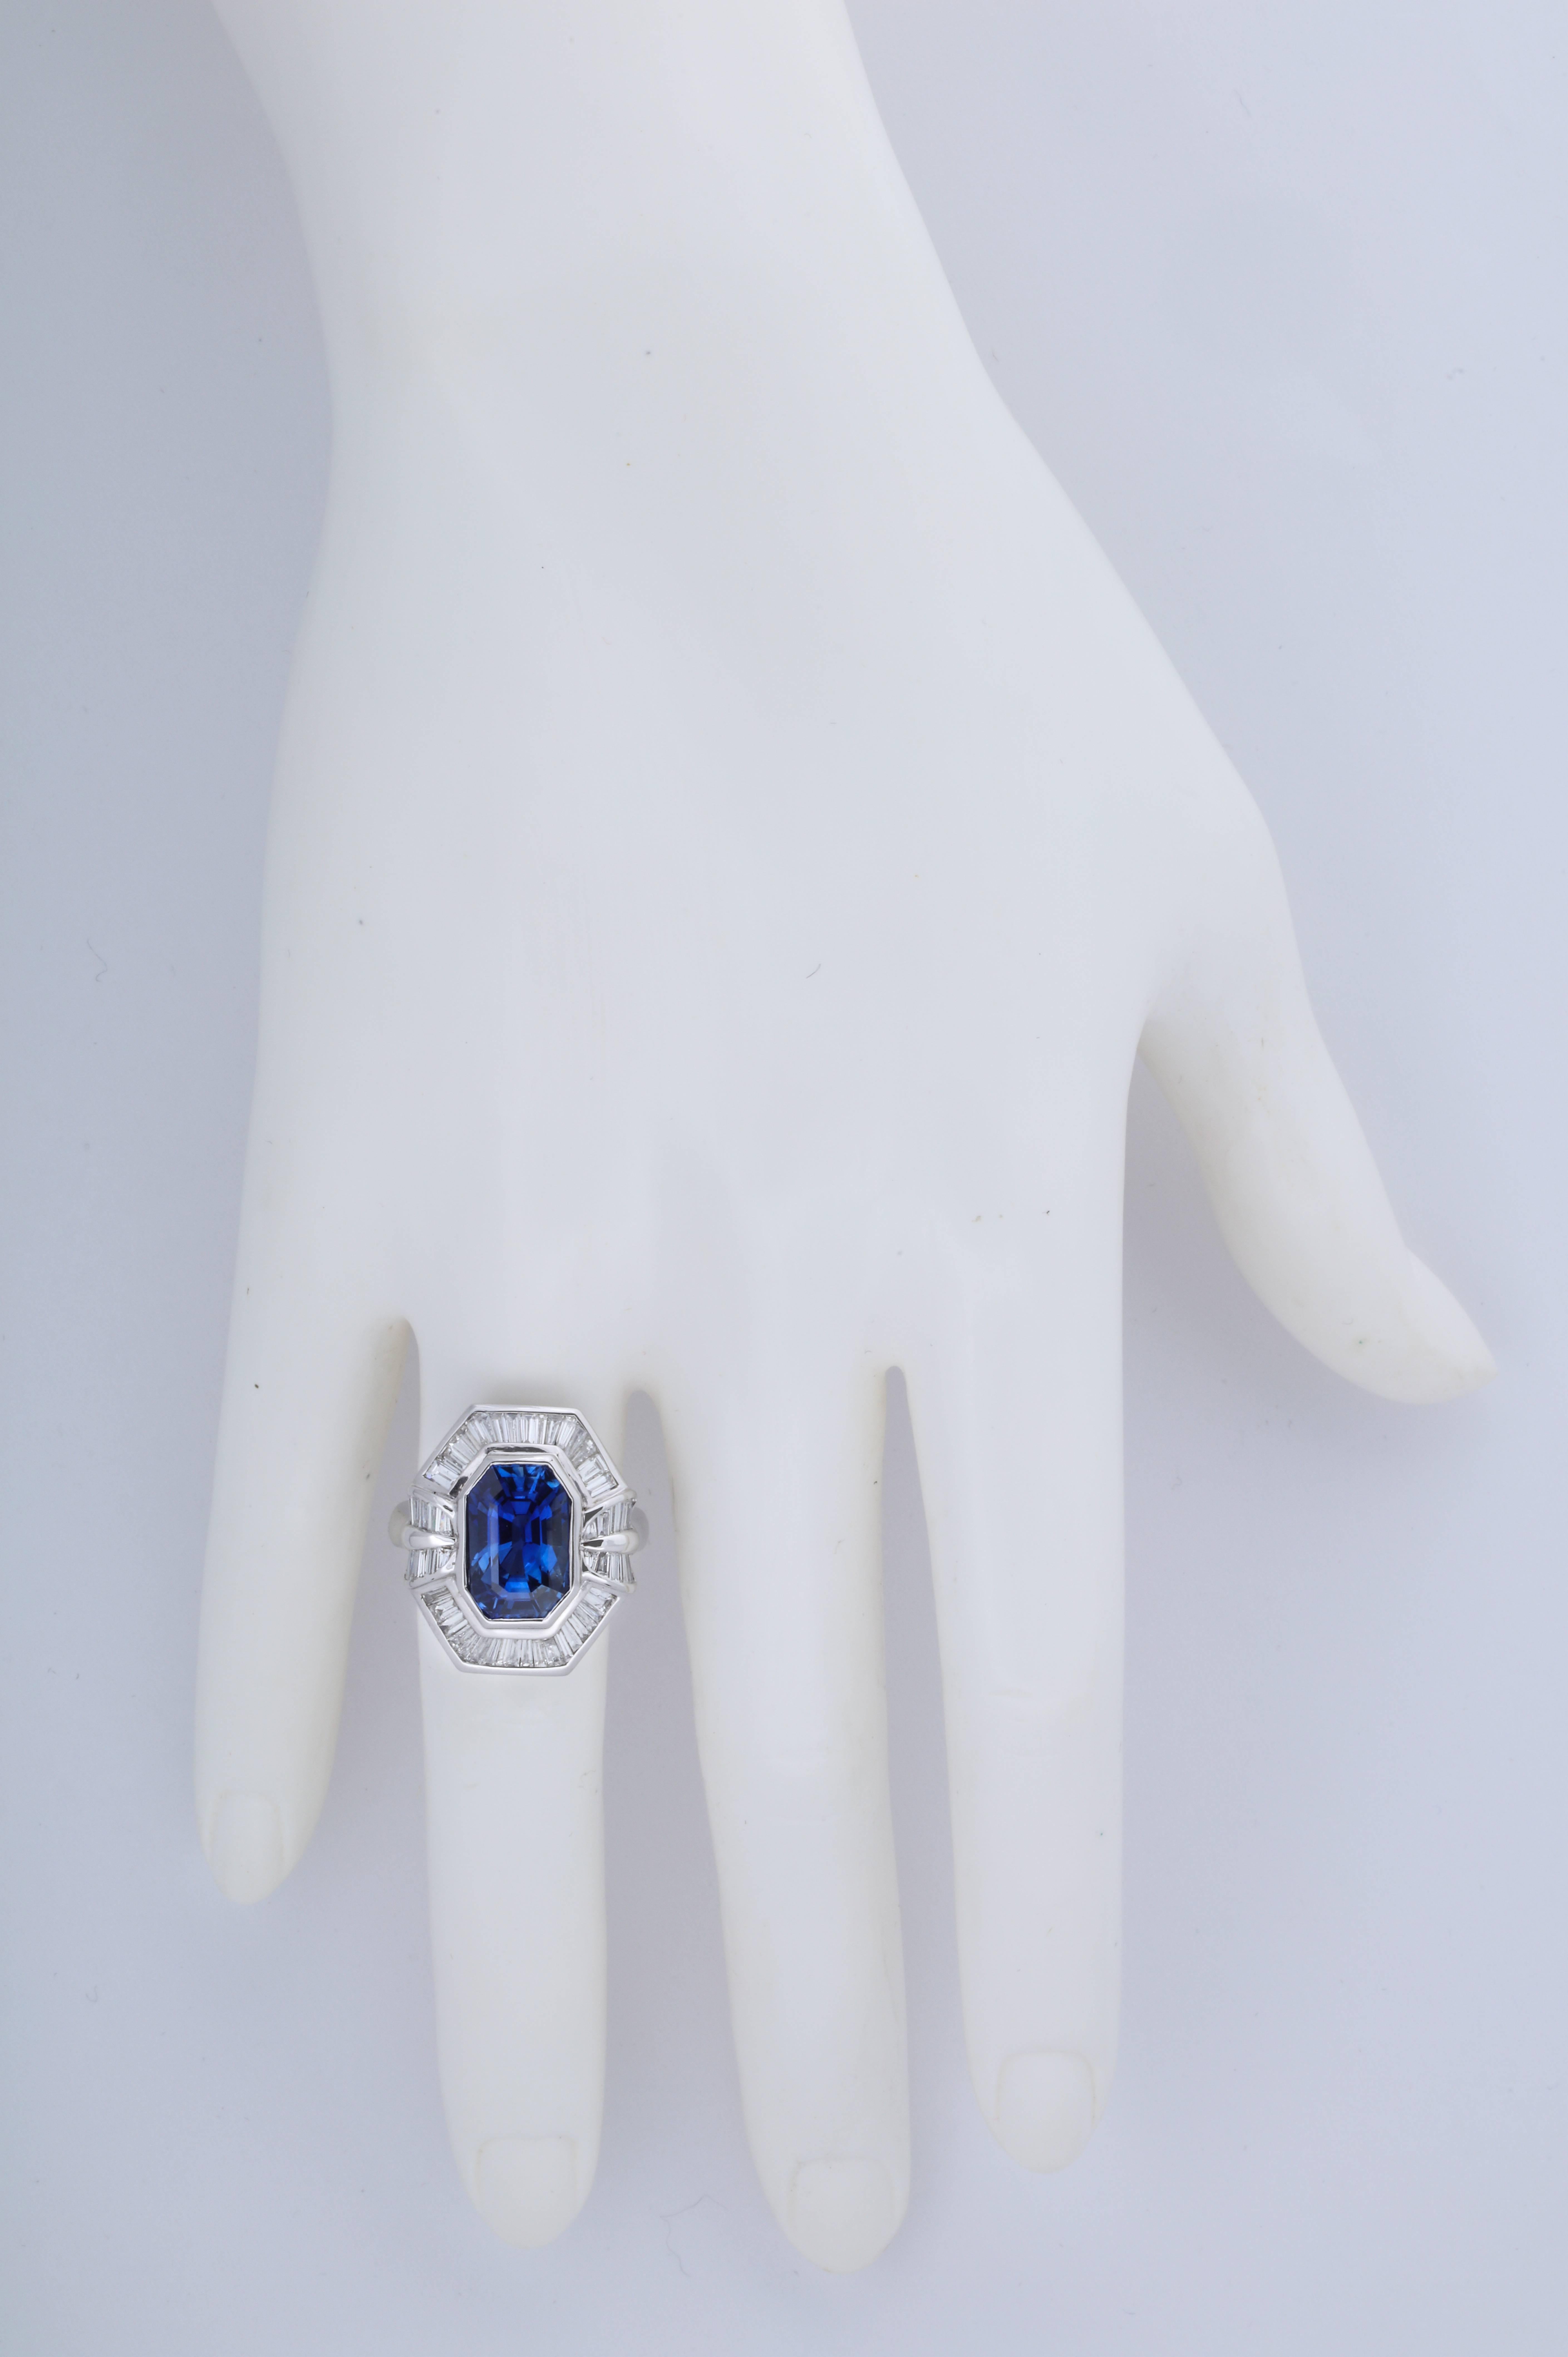 The long emerald cut shape is wonderfully elegant and it works perfectly with the baguette diamonds in the mounting.  The sapphire weighs app. 8 carats and there are app. 2.20 carats of fine, white baguette diamonds.

The ring was was made in one of